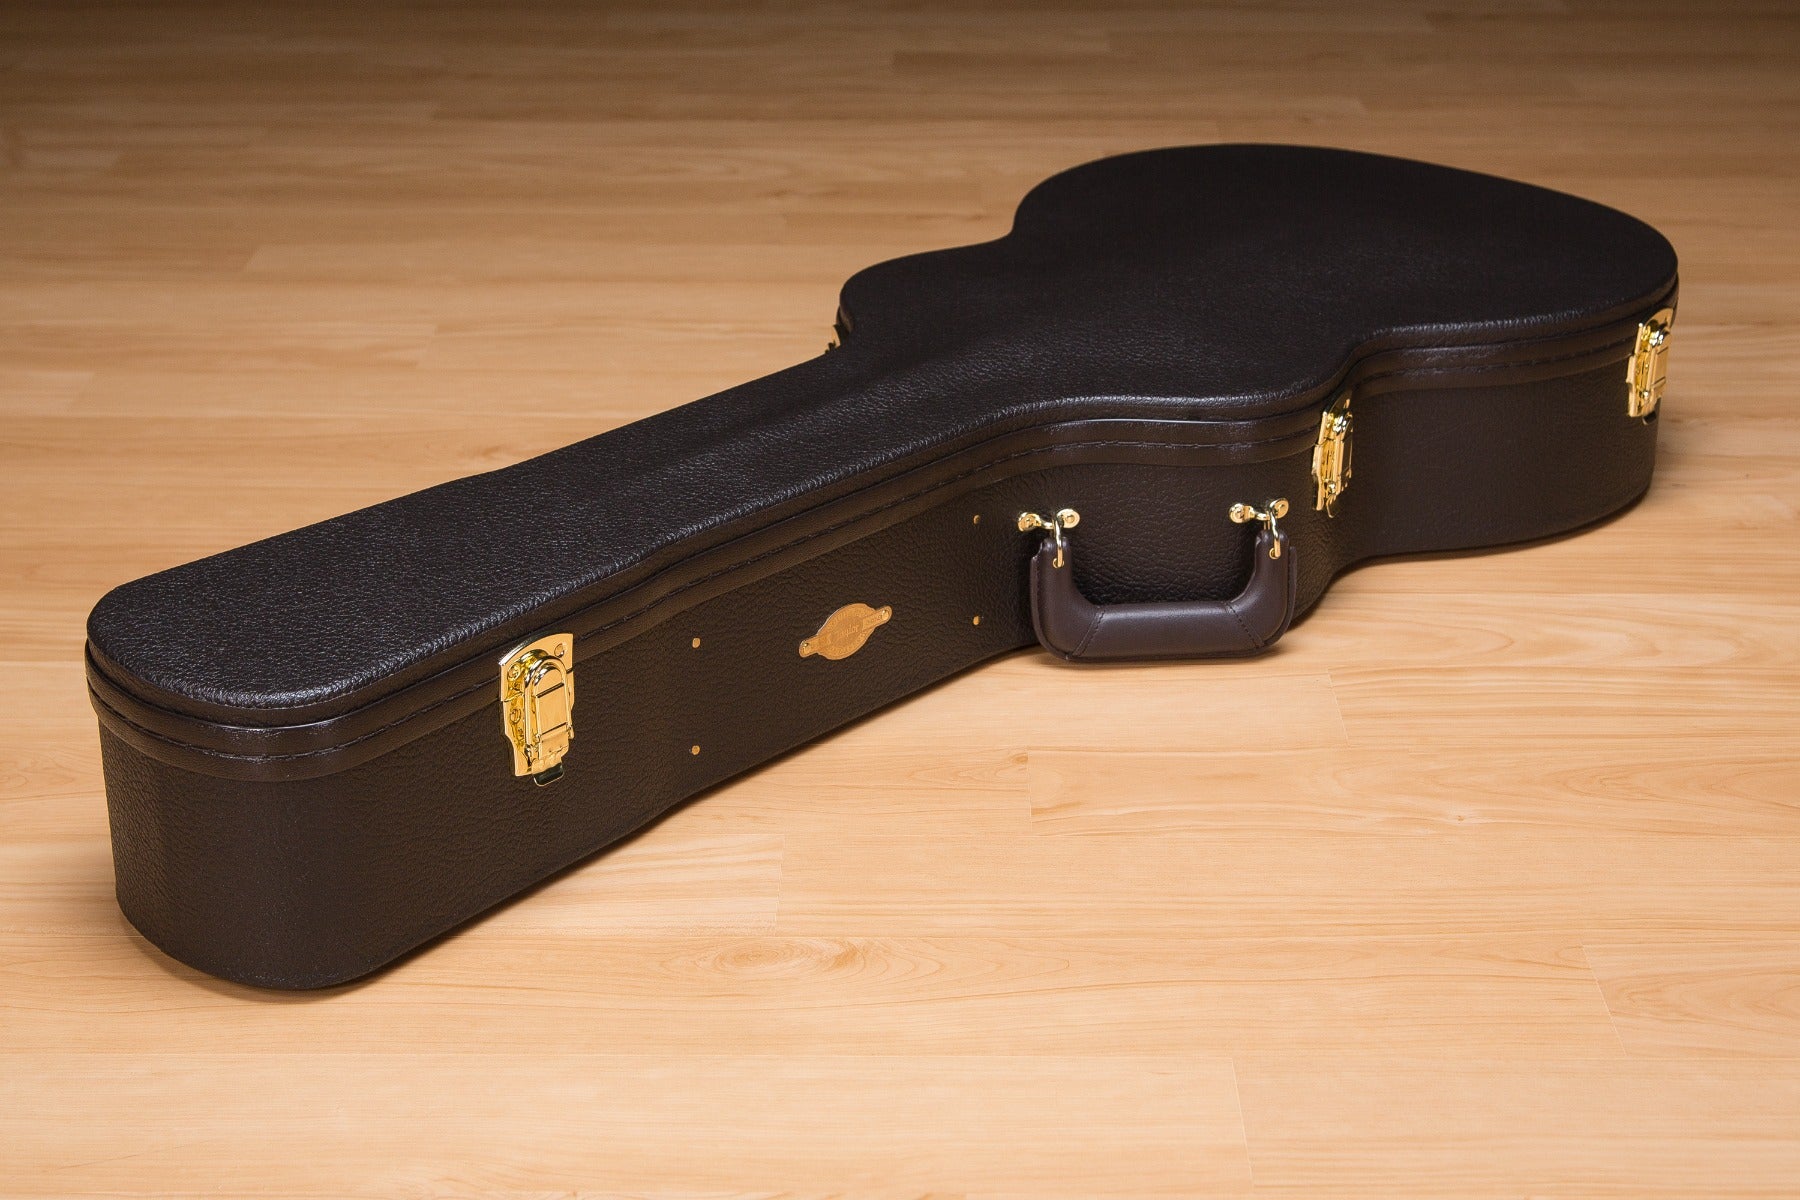 Included guitar case for the Taylor 214ce-BLK DLX Acoustic-Electric Guitar - Black view 1